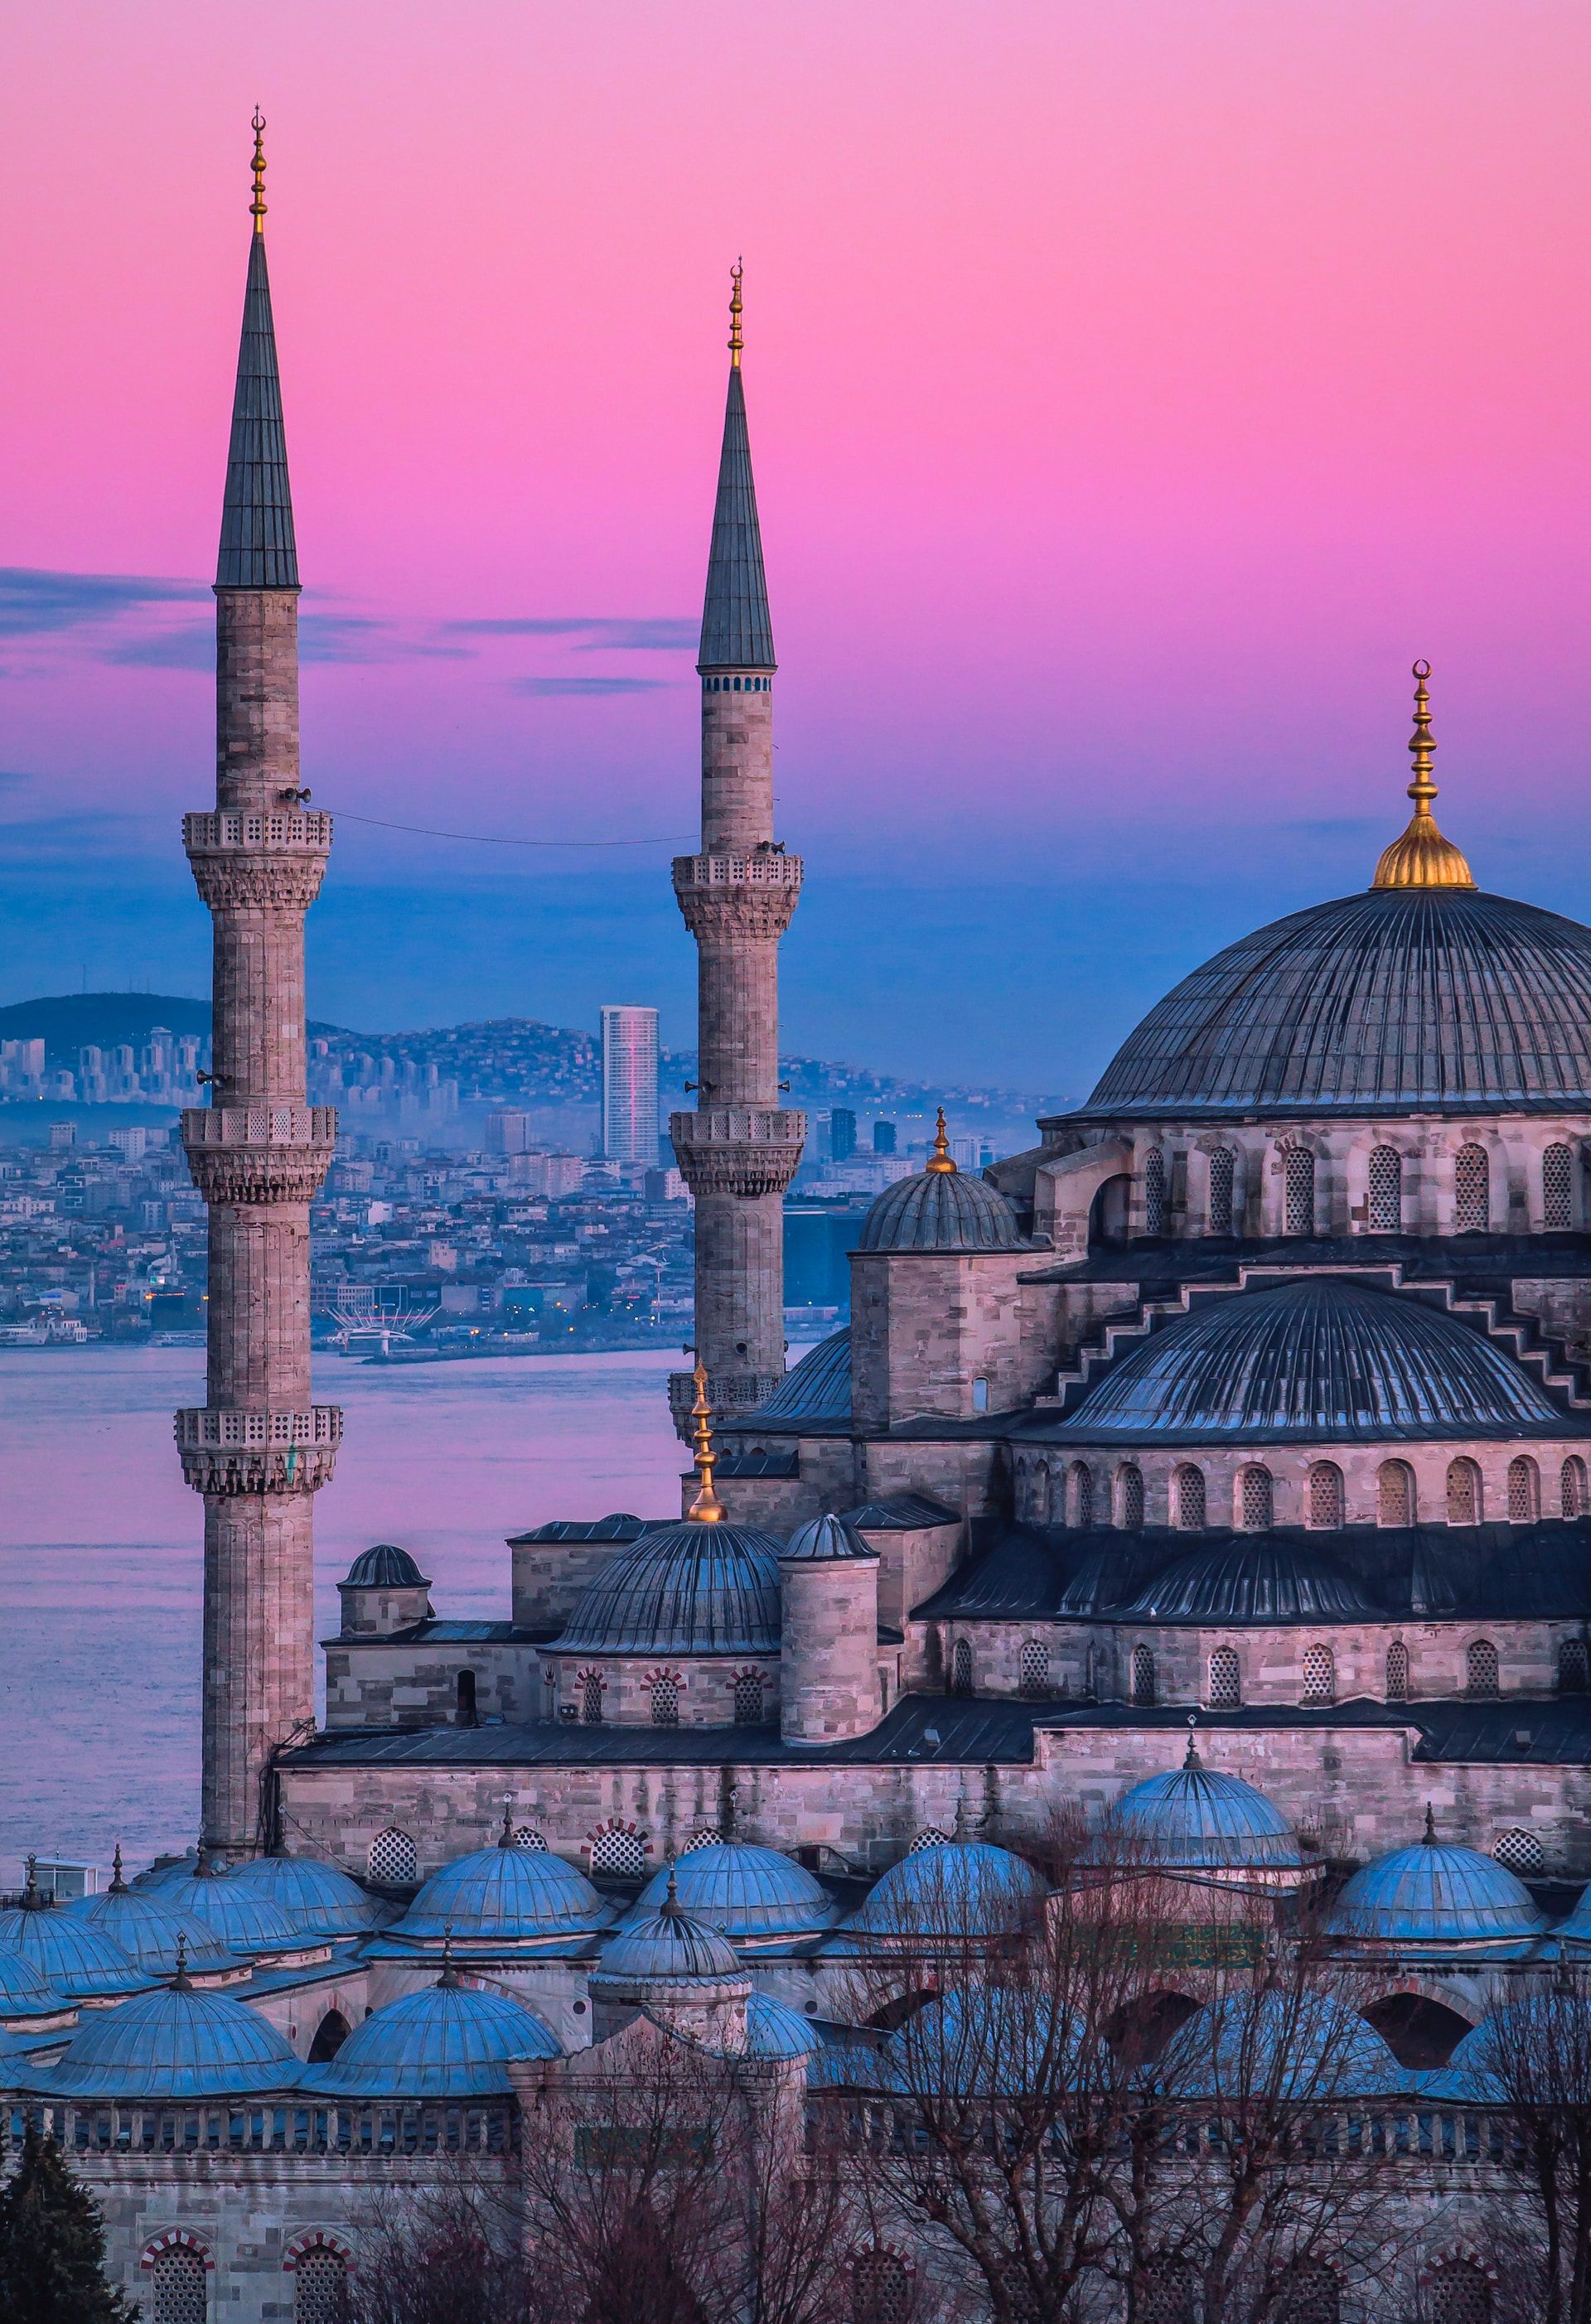 A close-up view of the Blue Mosque in Istanbul